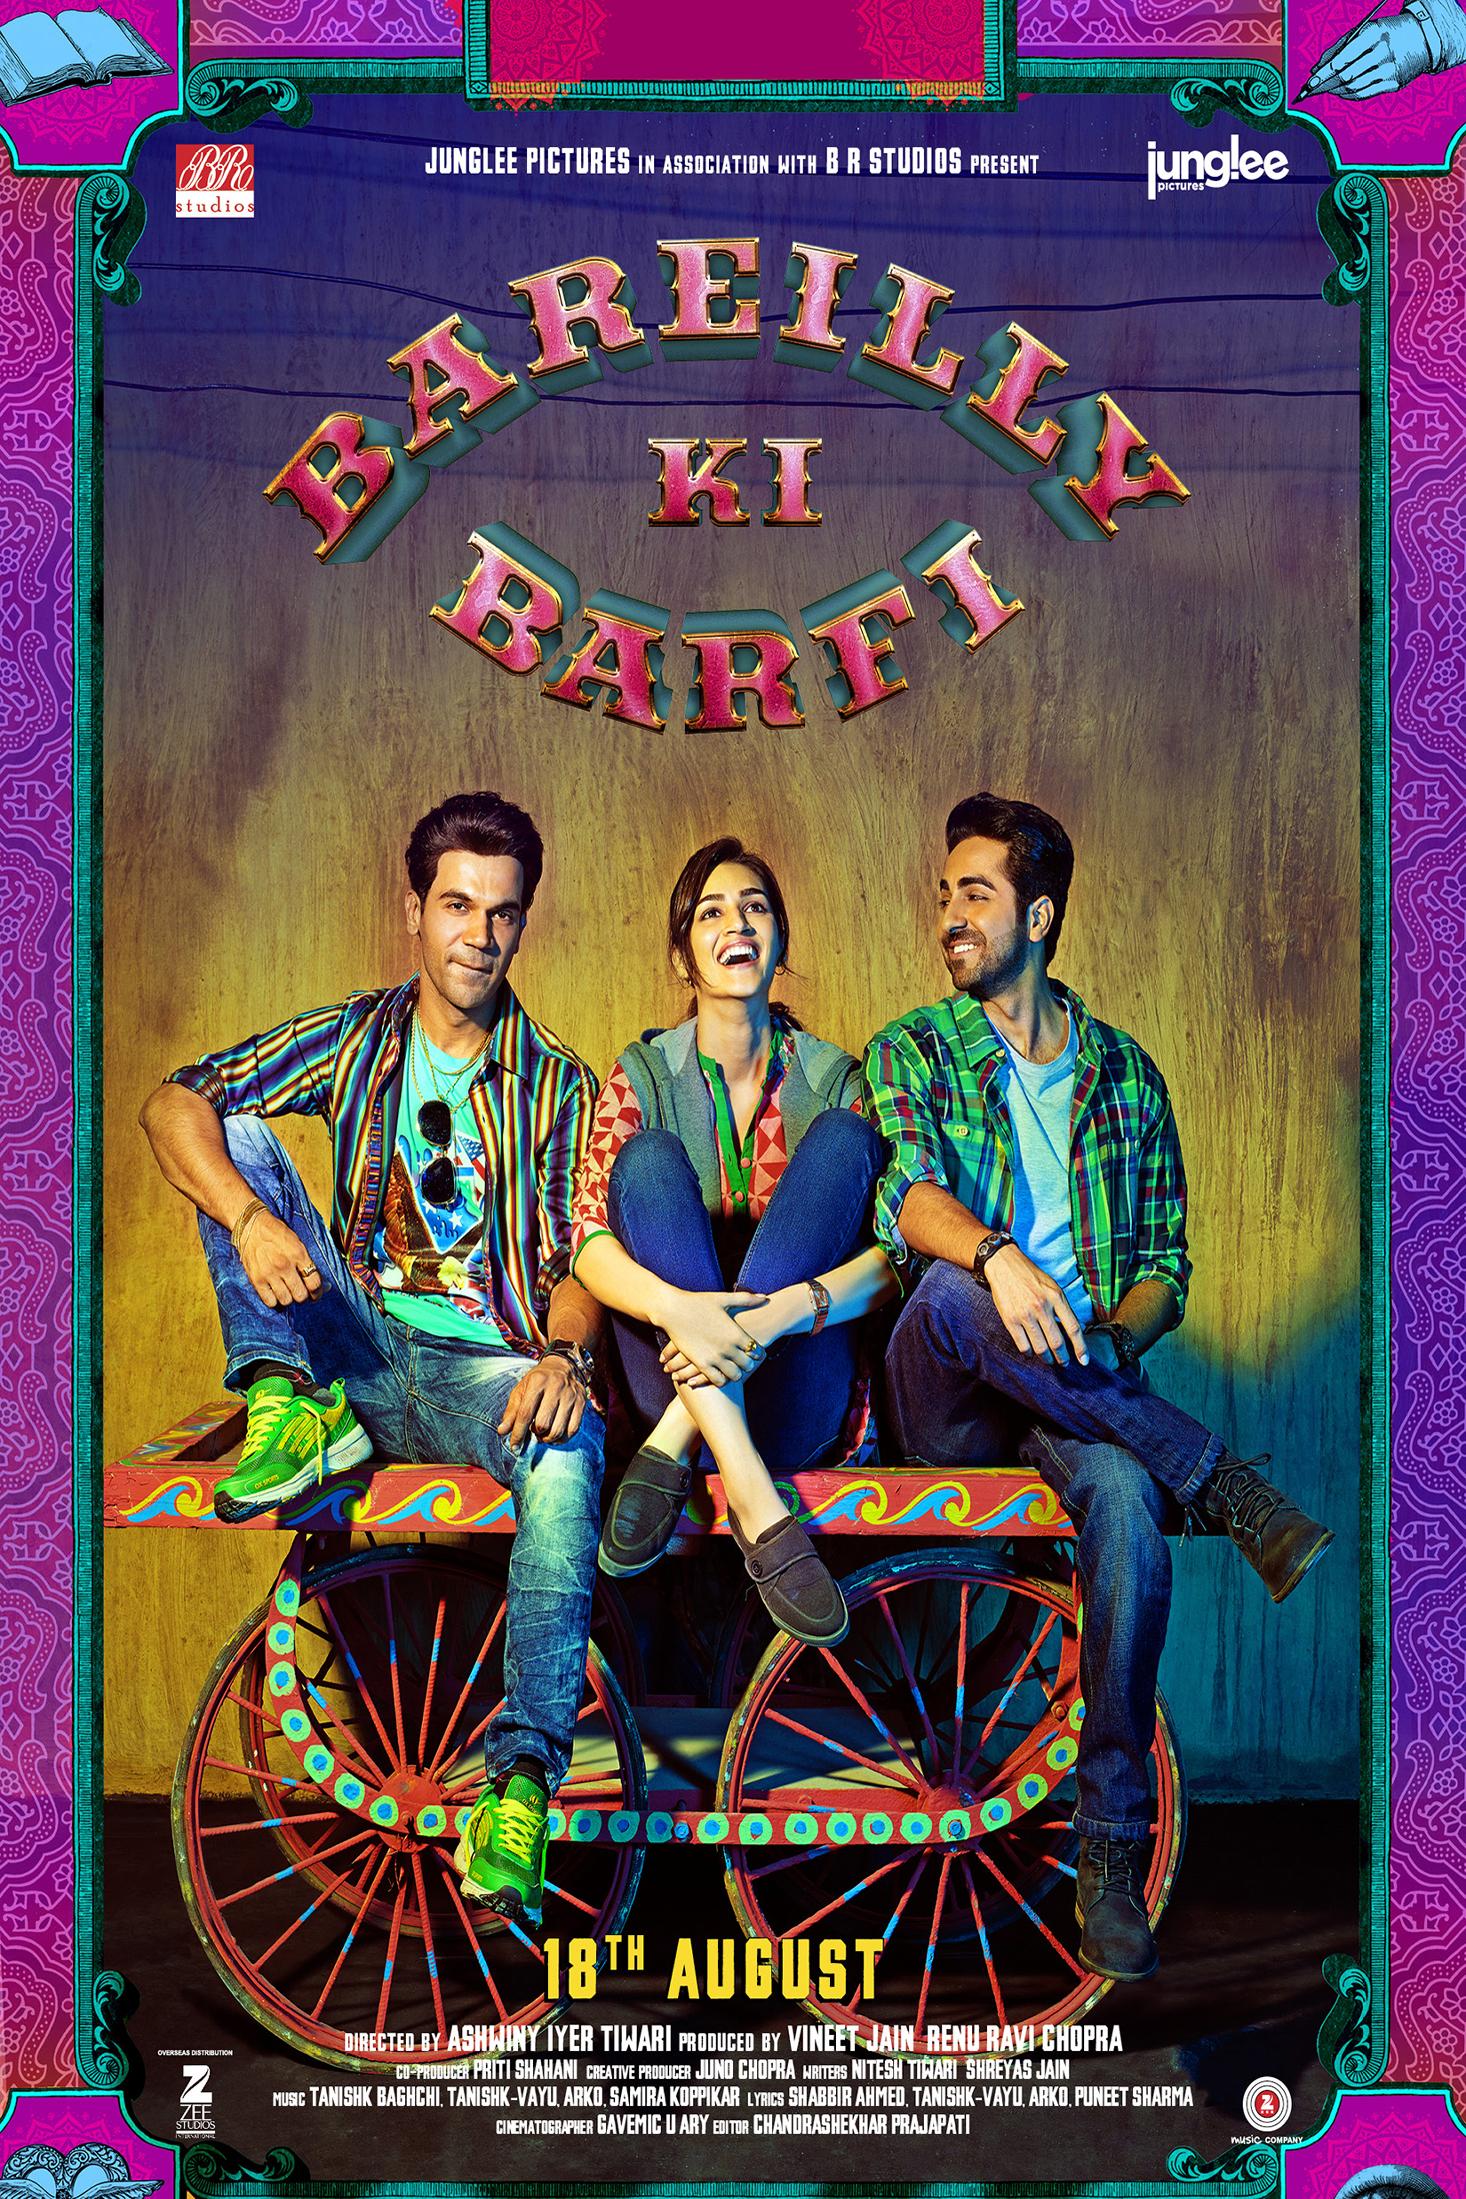 Bareilly Ki Barfi (2017) showcases Kriti Sanon, Ayushmann Khurrana, and Rajkummar Rao in a heartwarming comedy directed by Ashwiny Iyer Tiwari. This film follows the journey of a spirited young woman on a quest for love and self-discovery in a small town.